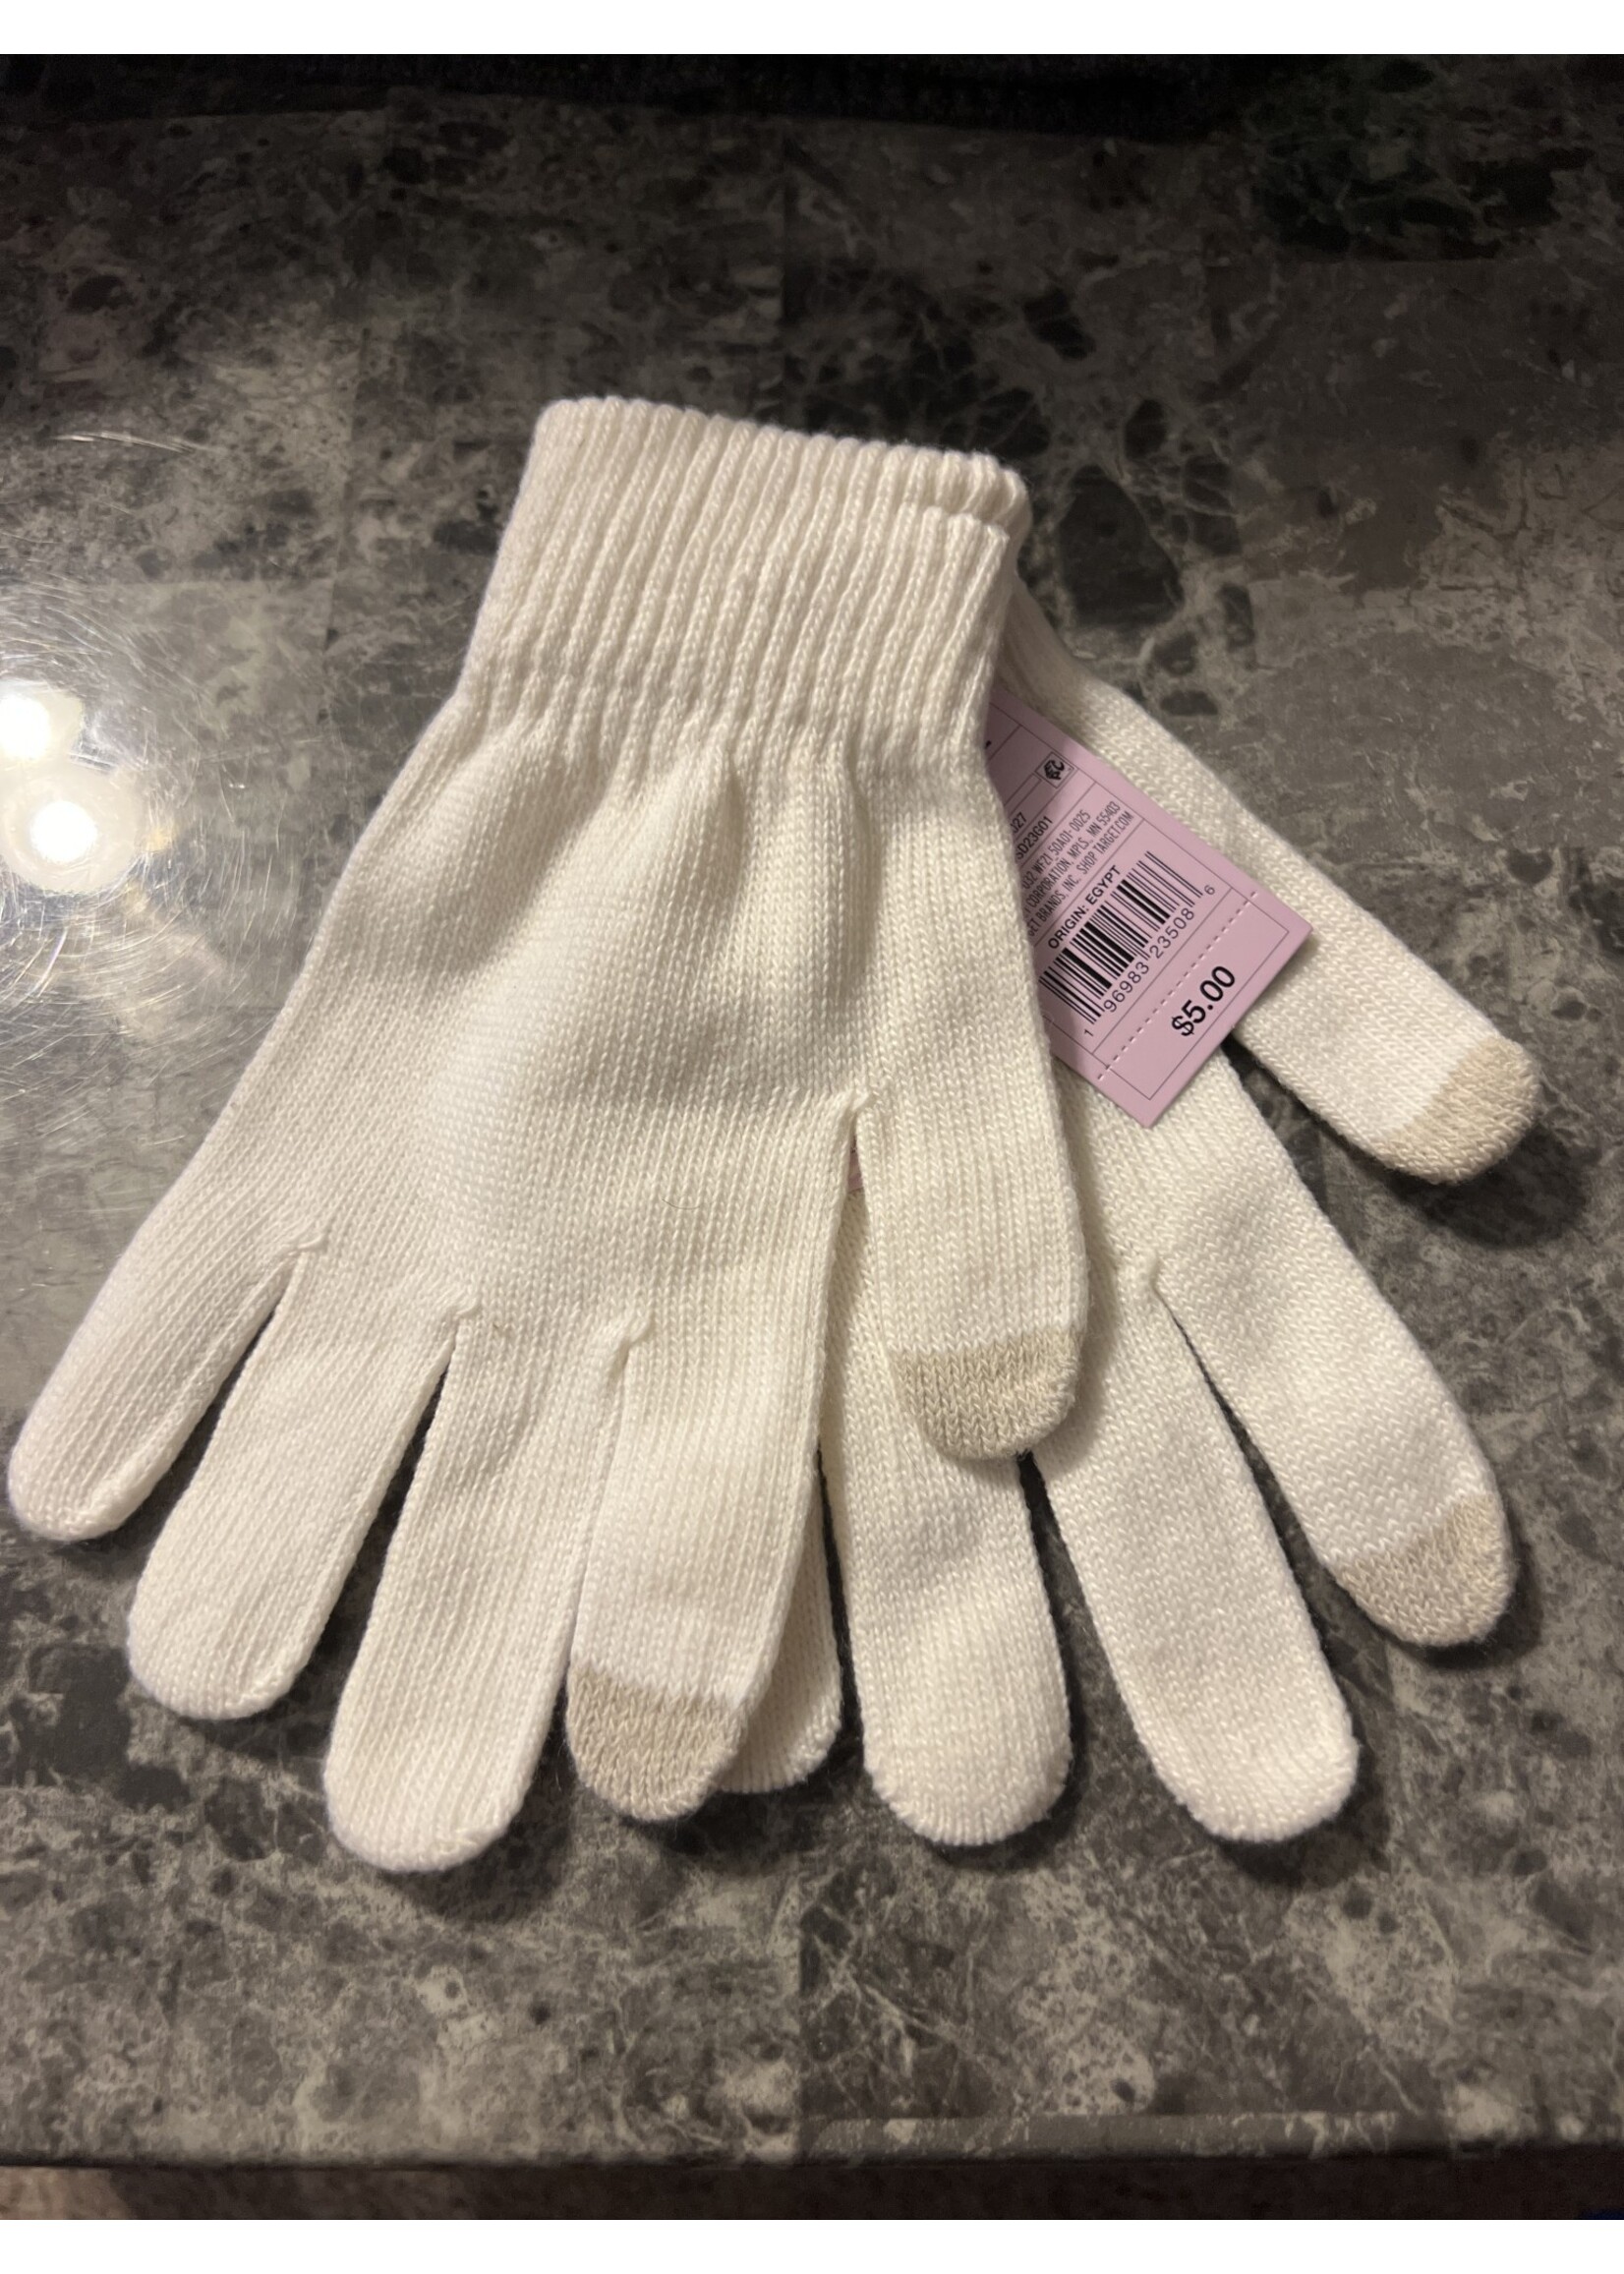 Tech Touch Knit Gloves - Wild Fable Cream